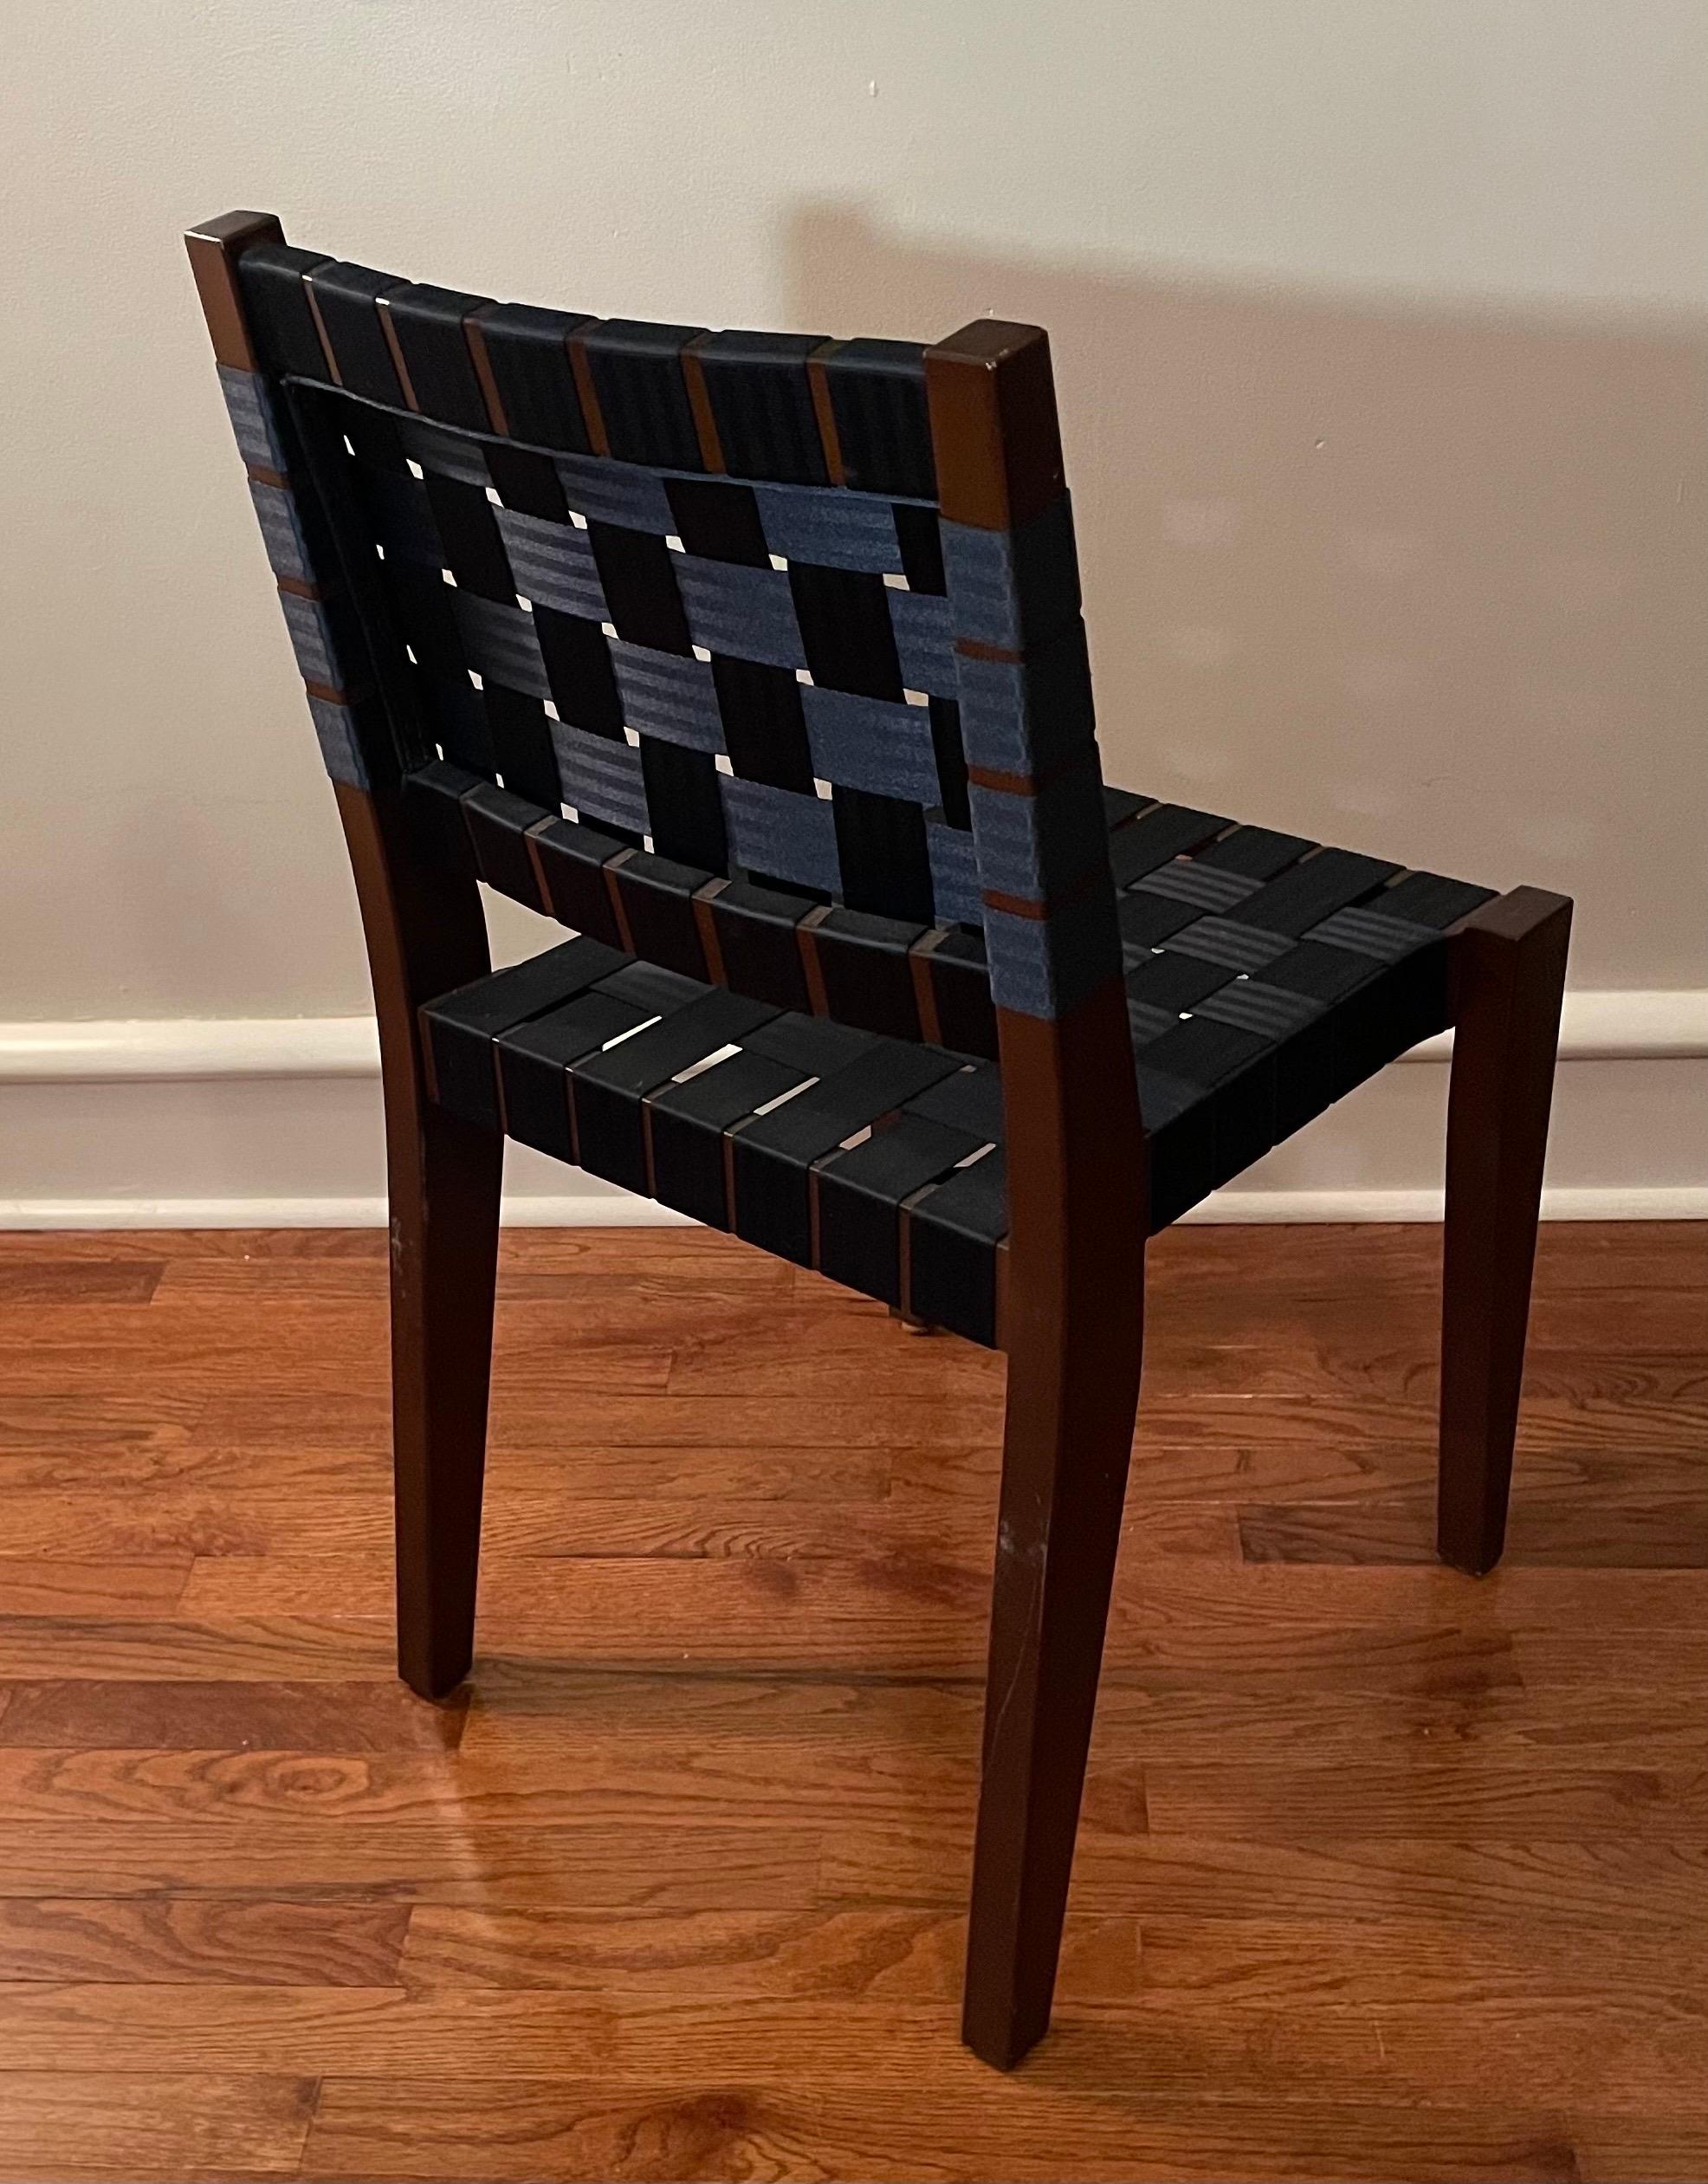 American Peter Danko Ashton Side Chairs With Navy Blue Woven Seat & Back, Set of 4 For Sale